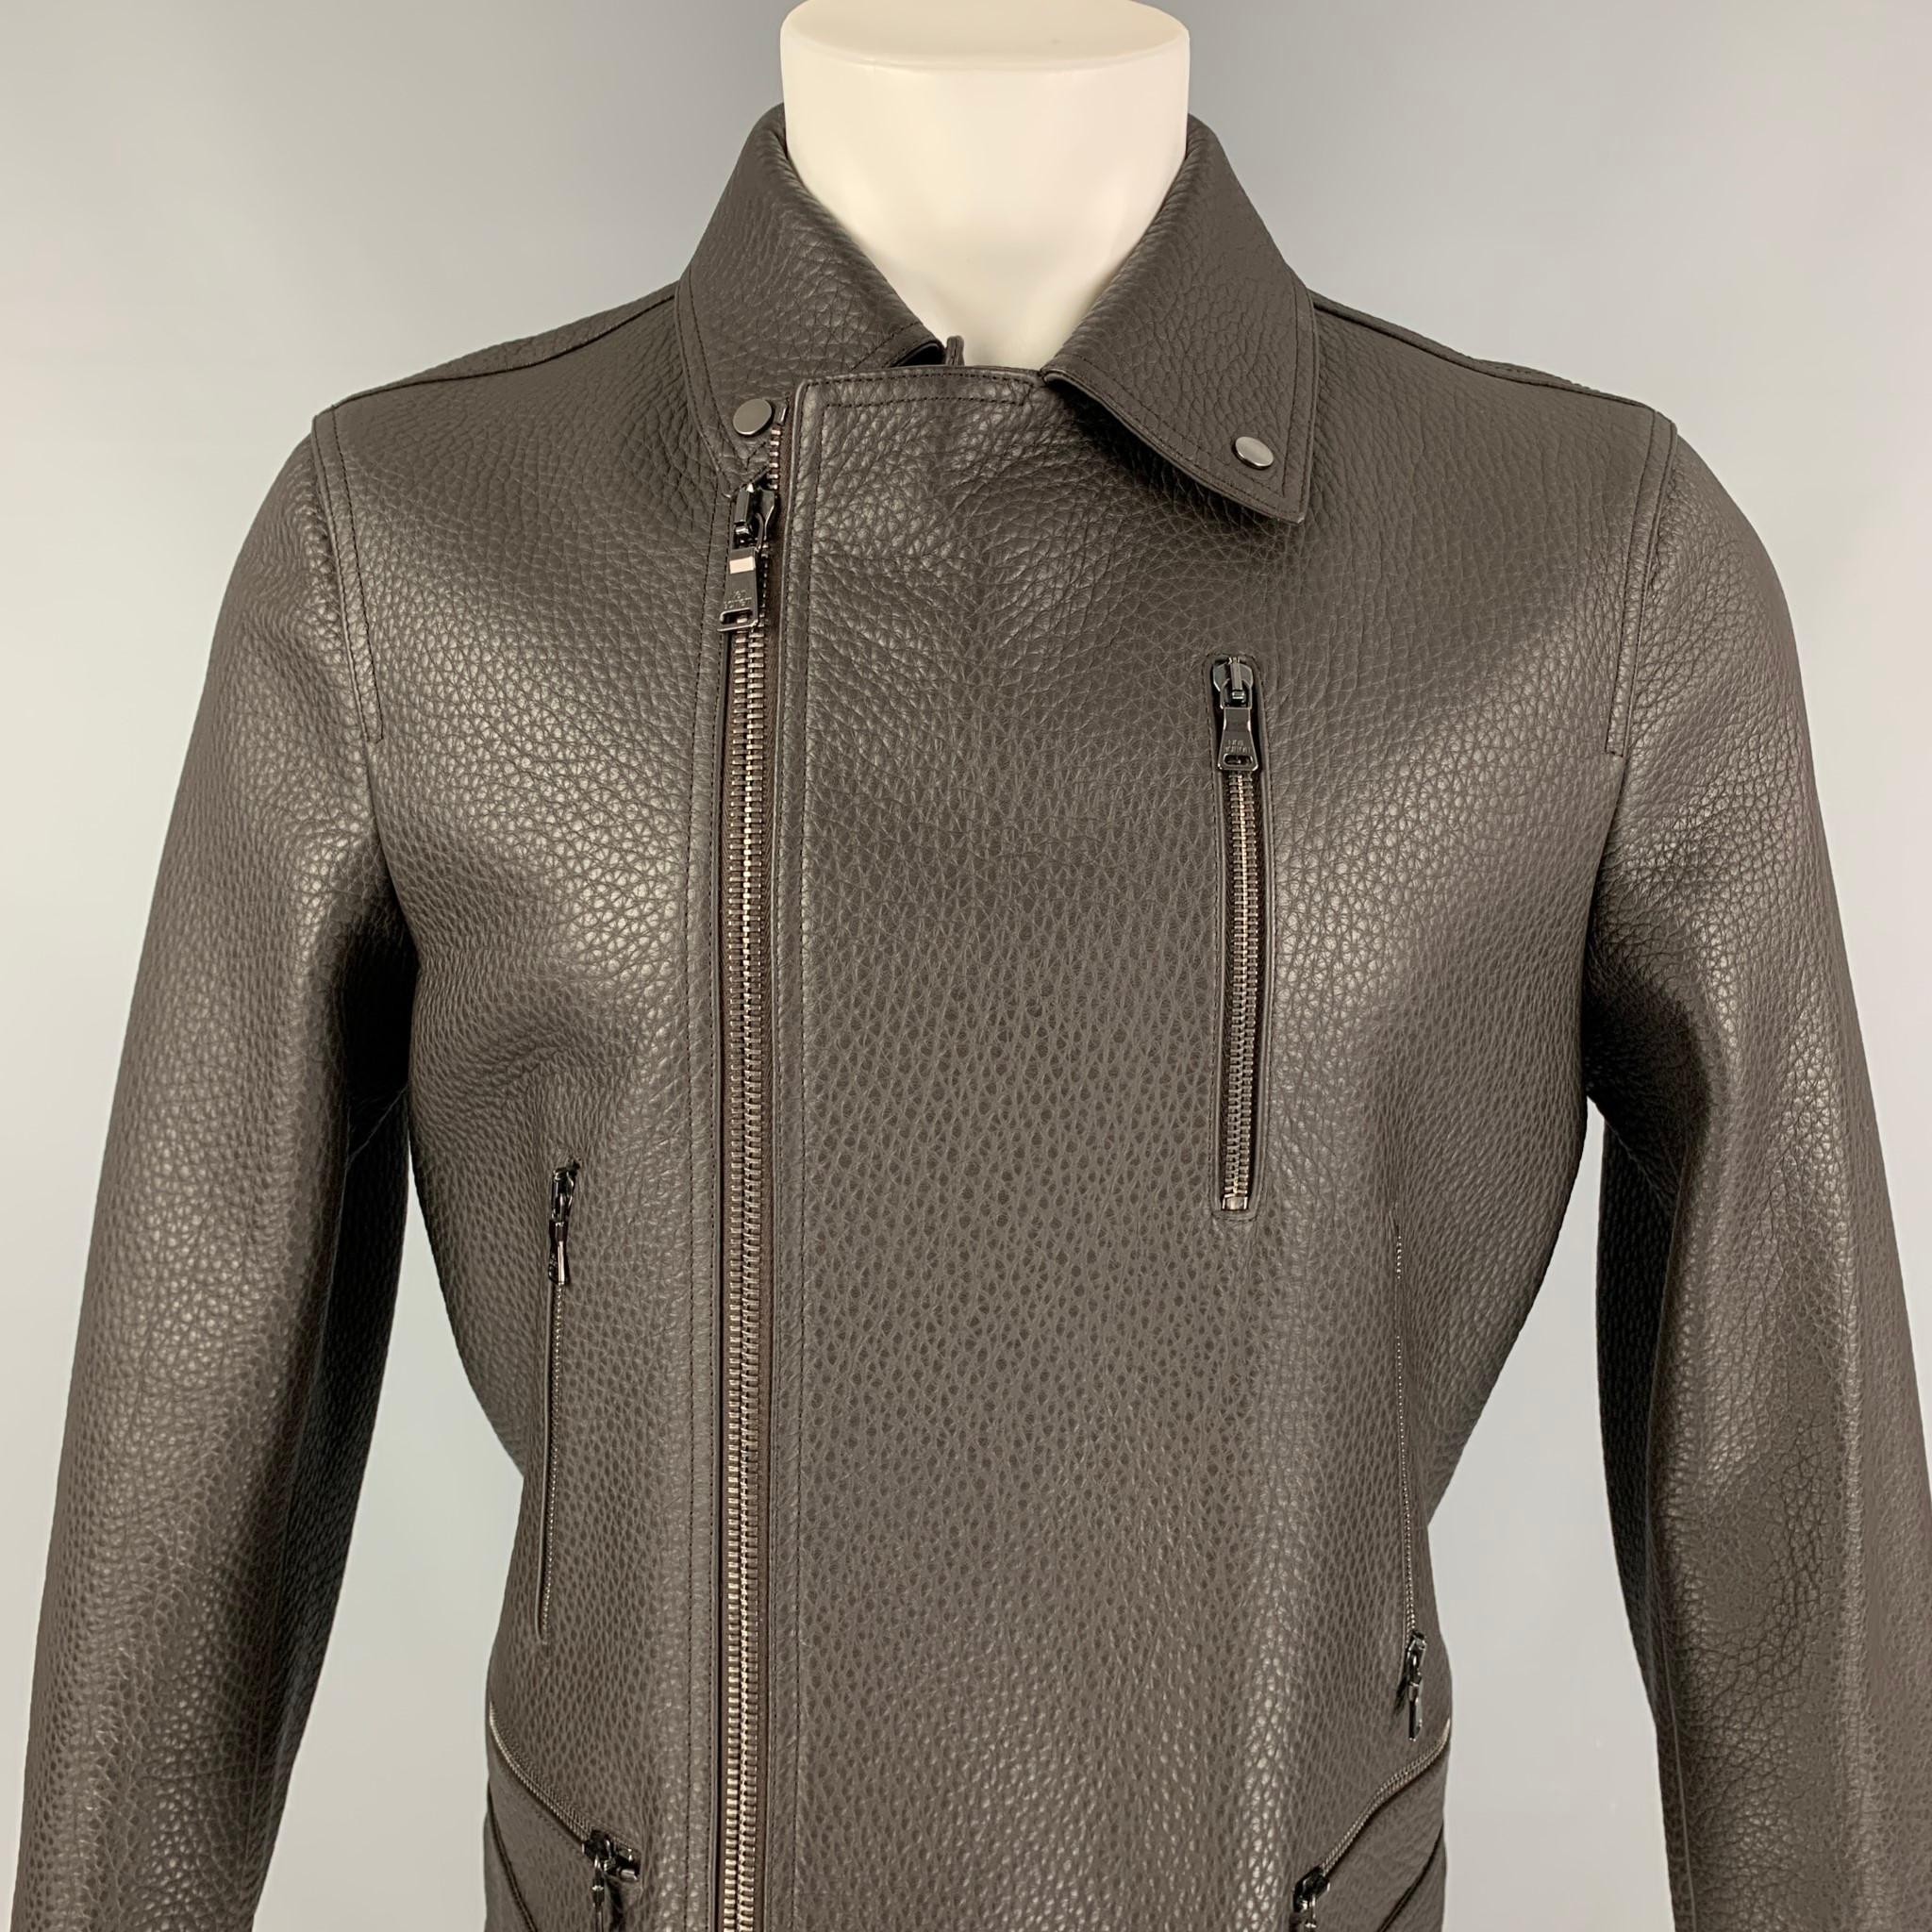 NEIL BARRETT jacket comes in a brown pebble grain leather with a full liner featuring a biker style, front zipper pockets, silver tone hardware, snap button details, and a zip up closure. Made in Italy. 

New Without Tags. 
Marked: M
Original Retail